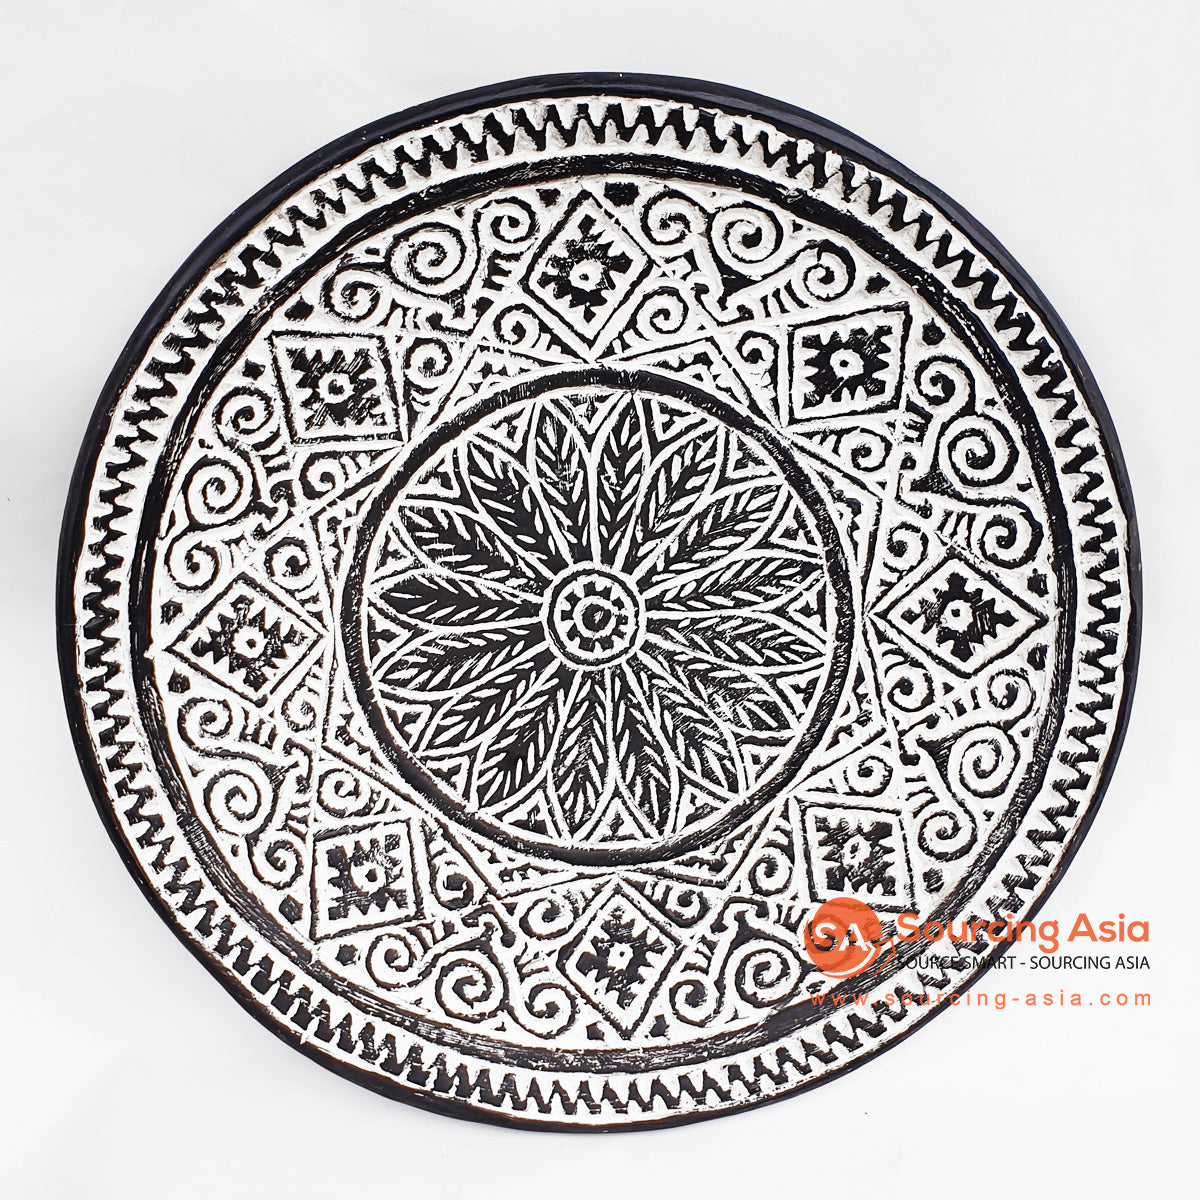 DGPC006 DARK BROWN SUAR WOOD TRIBAL CARVED ROUND PLATE WALL DECORATION